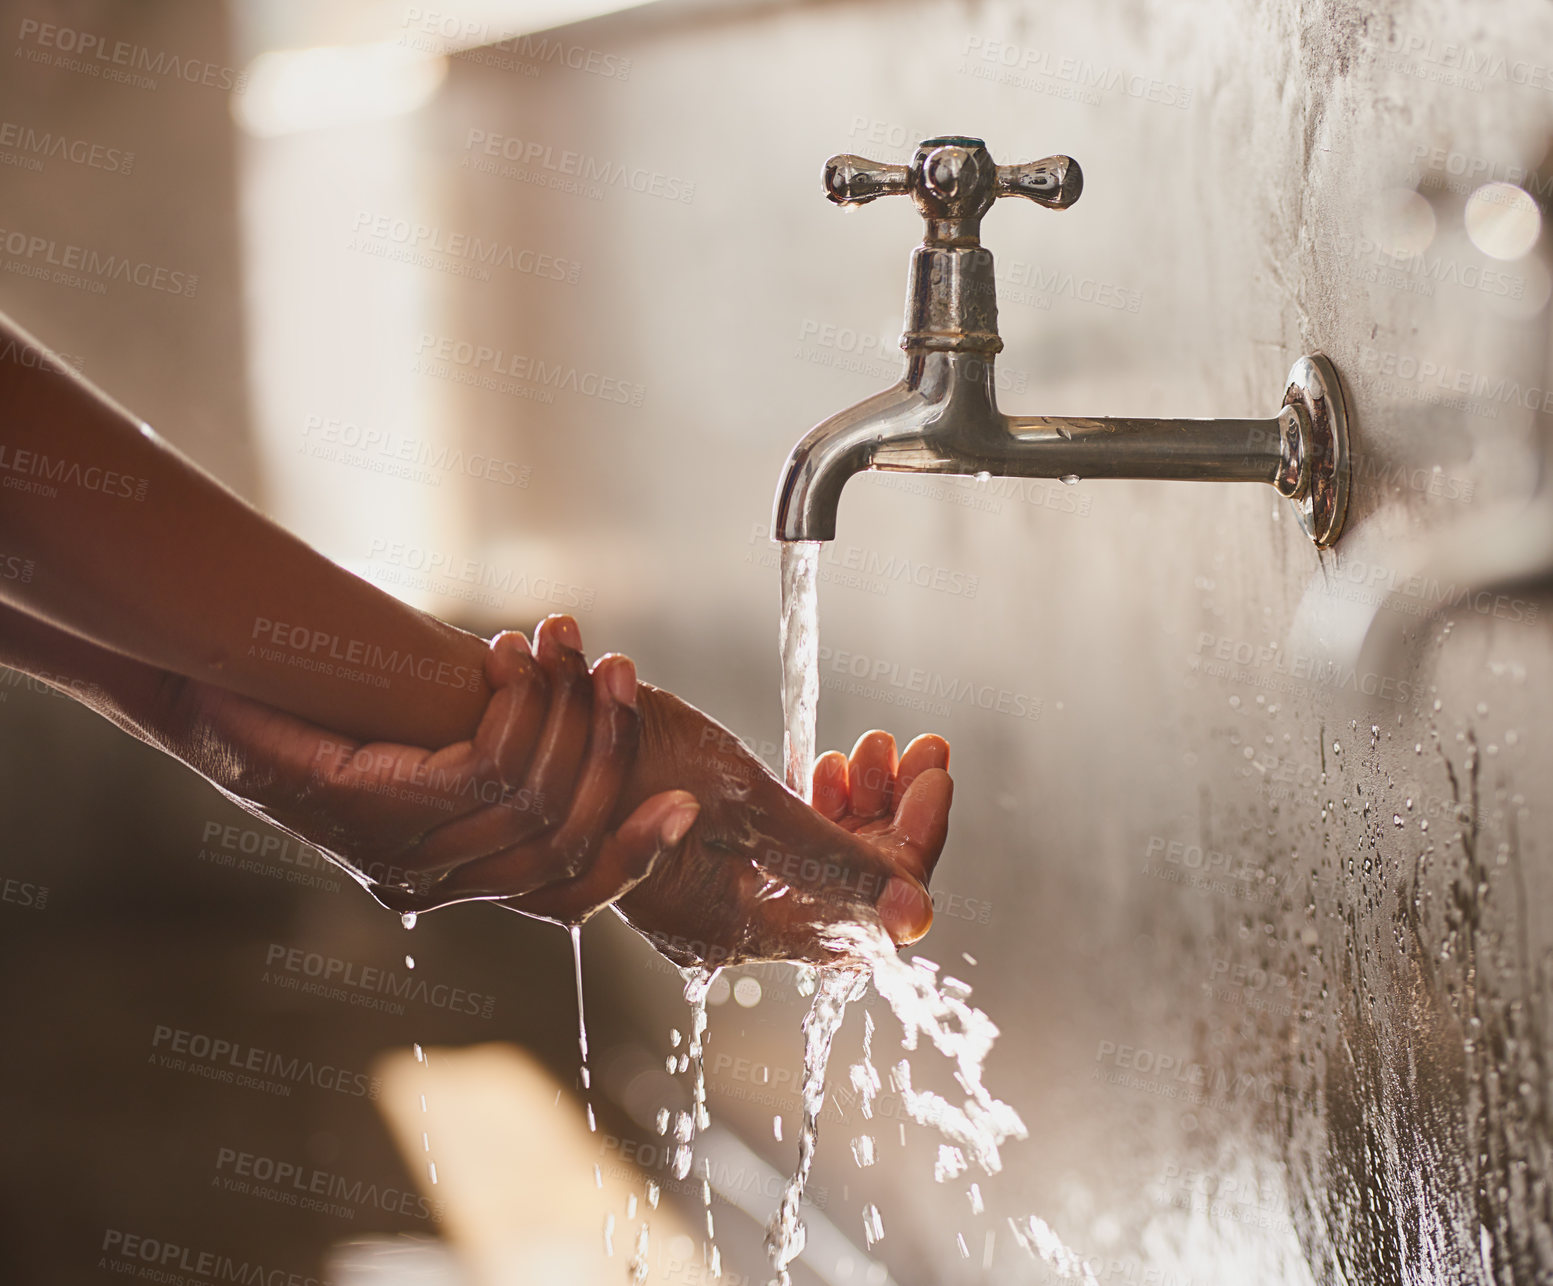 Buy stock photo Cropped closeup shot of a woman washing her hands under a faucet